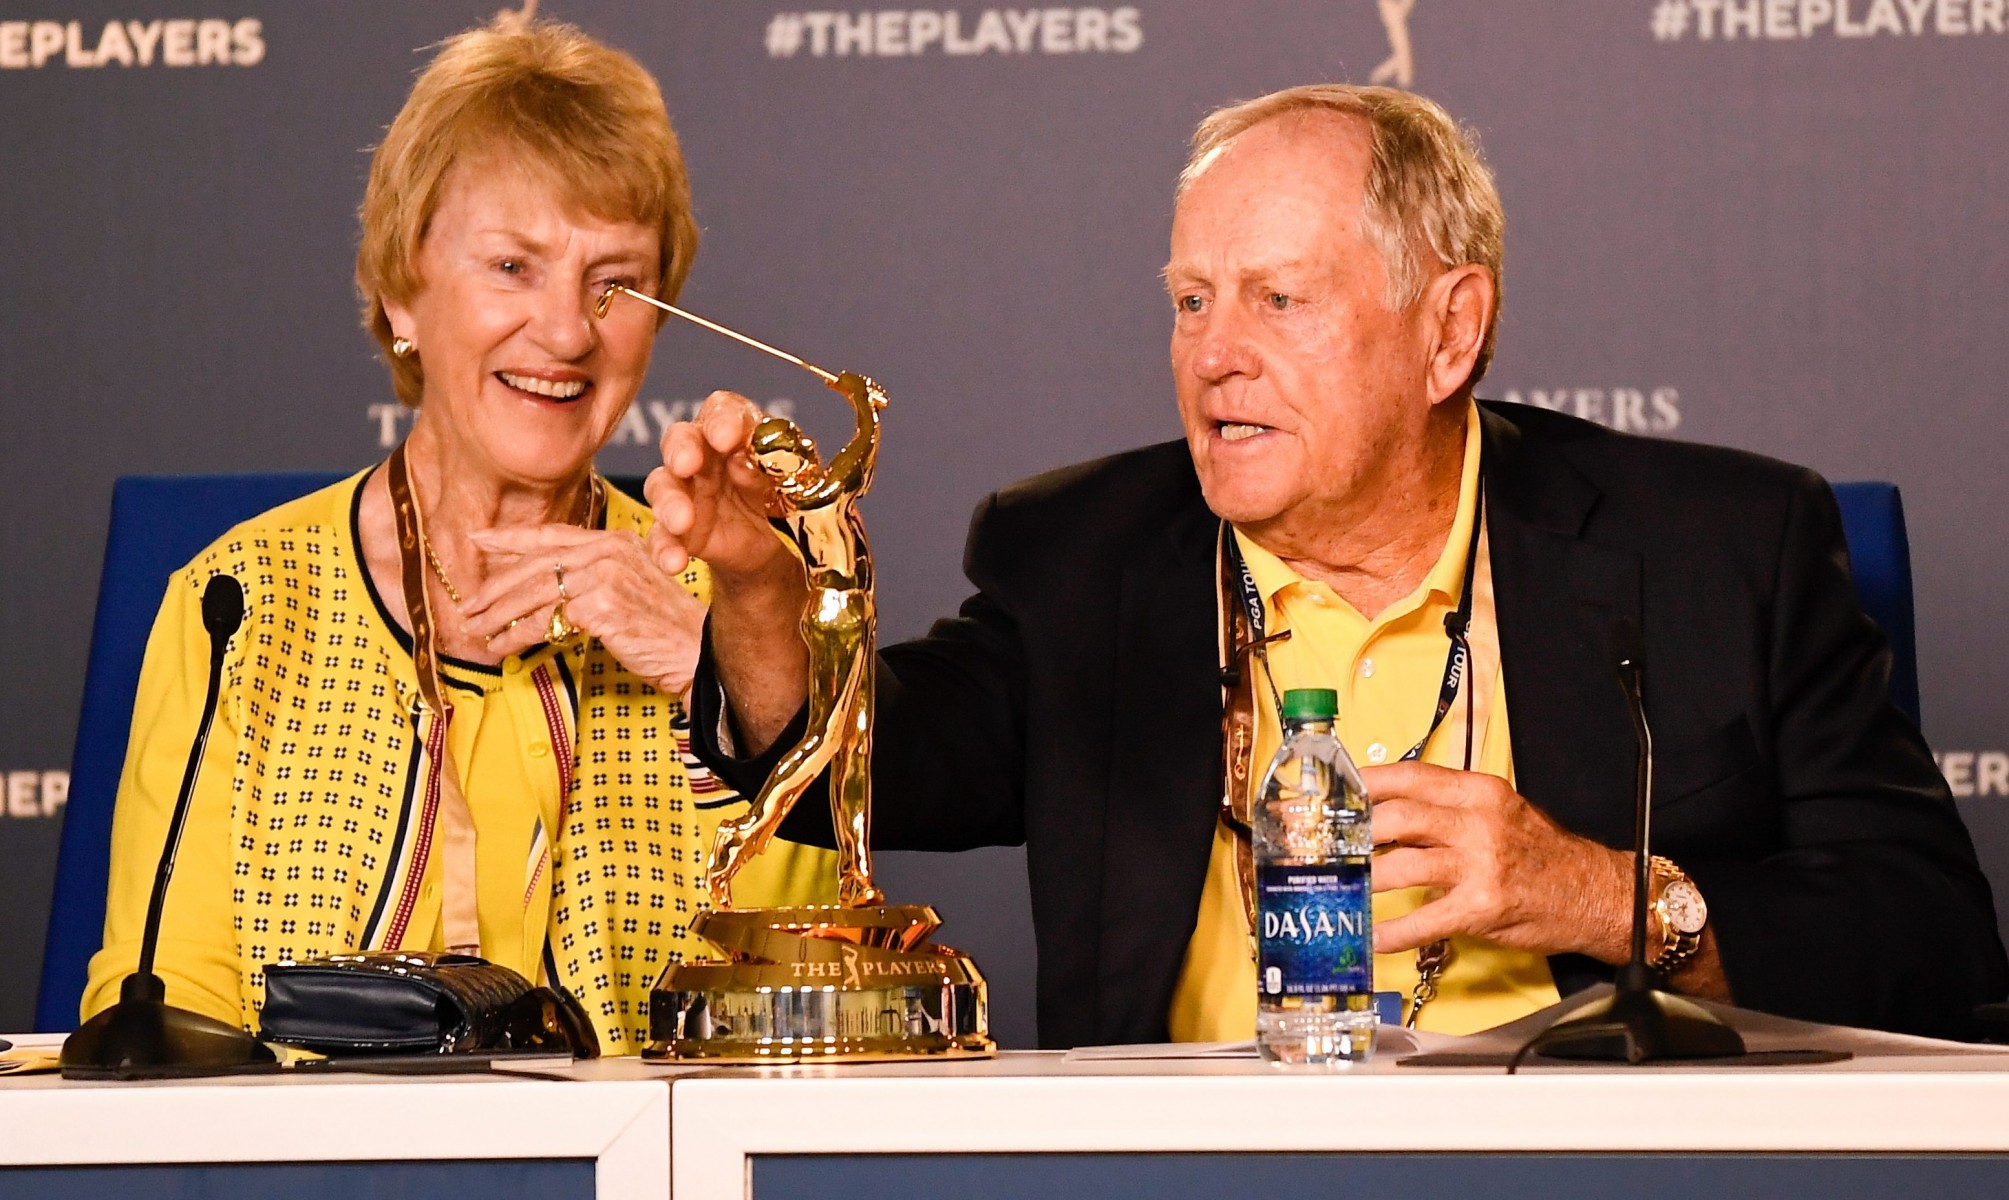 Even this year Jack Nicklaus, seen with wife Barbara, could be seen wearing his historic Rolex